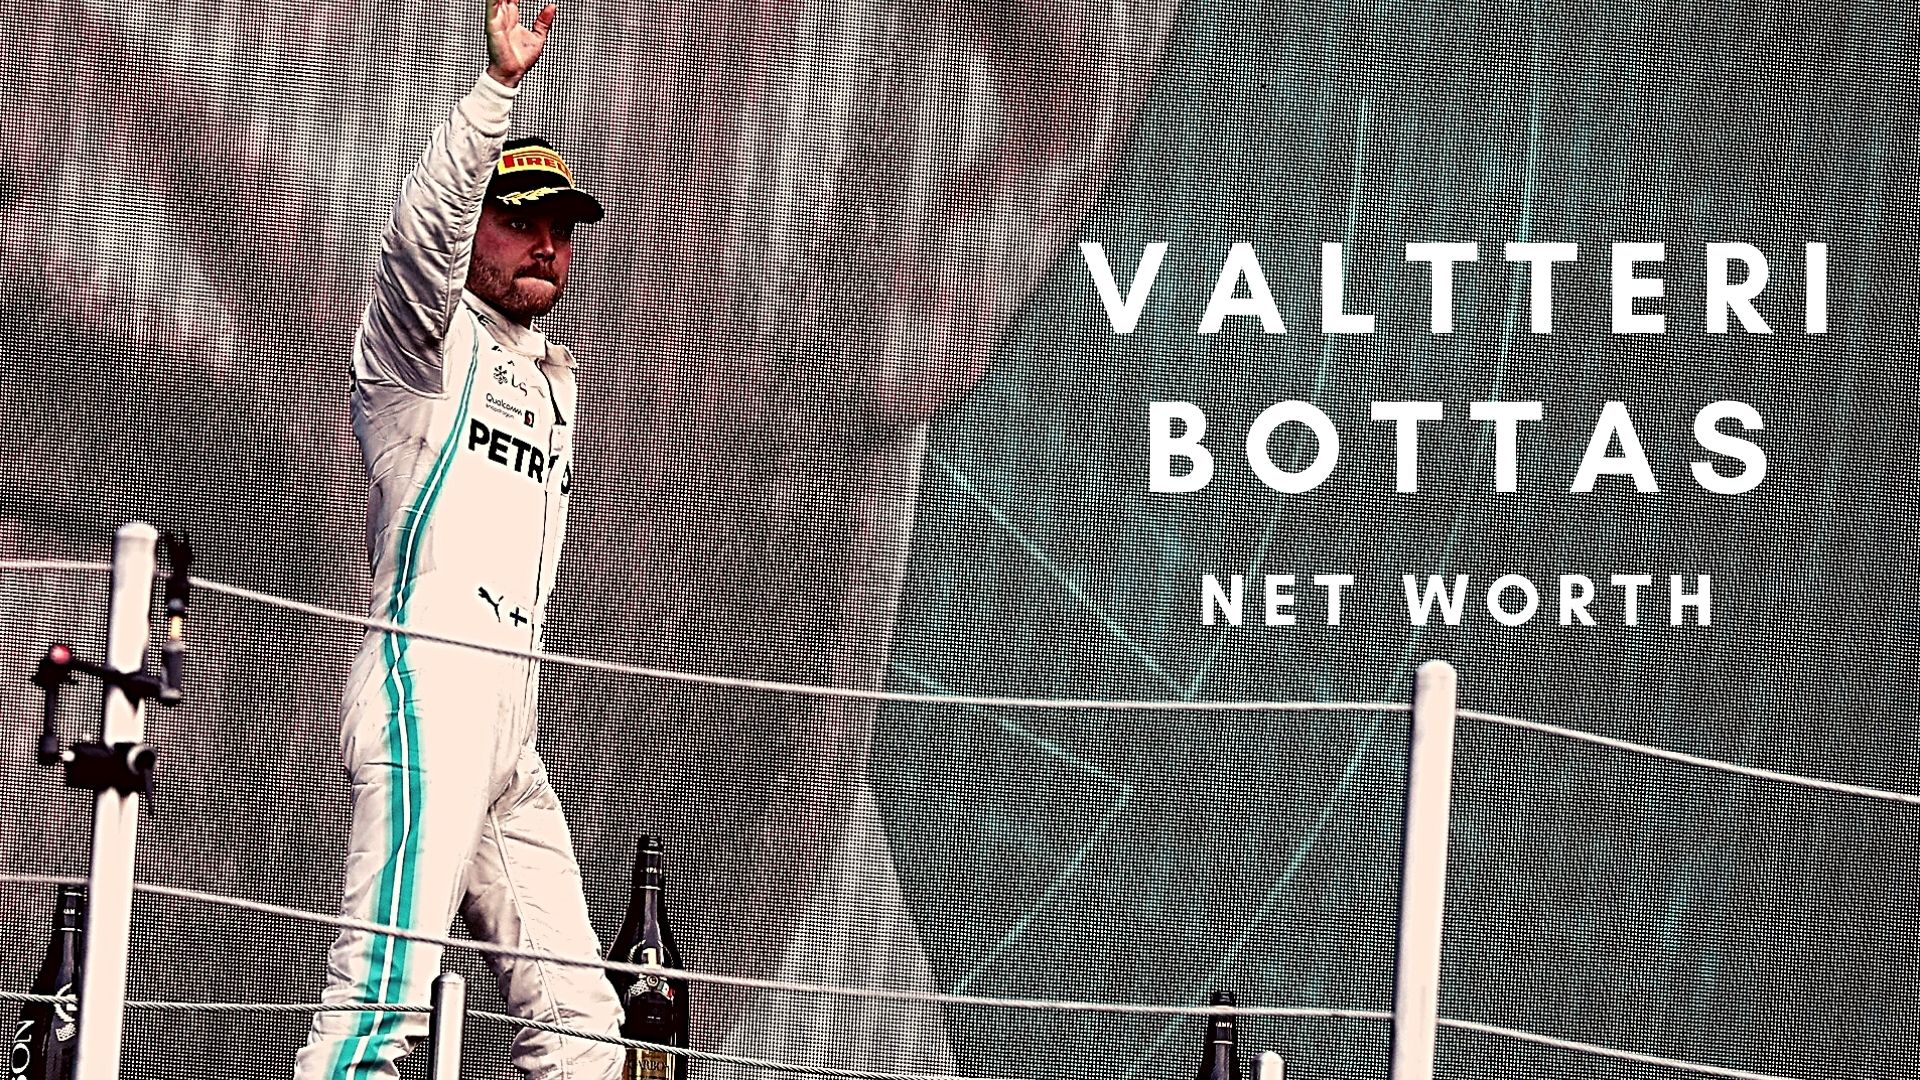 Valtteri Bottas is one of the few Finnish racers to have driven in F1